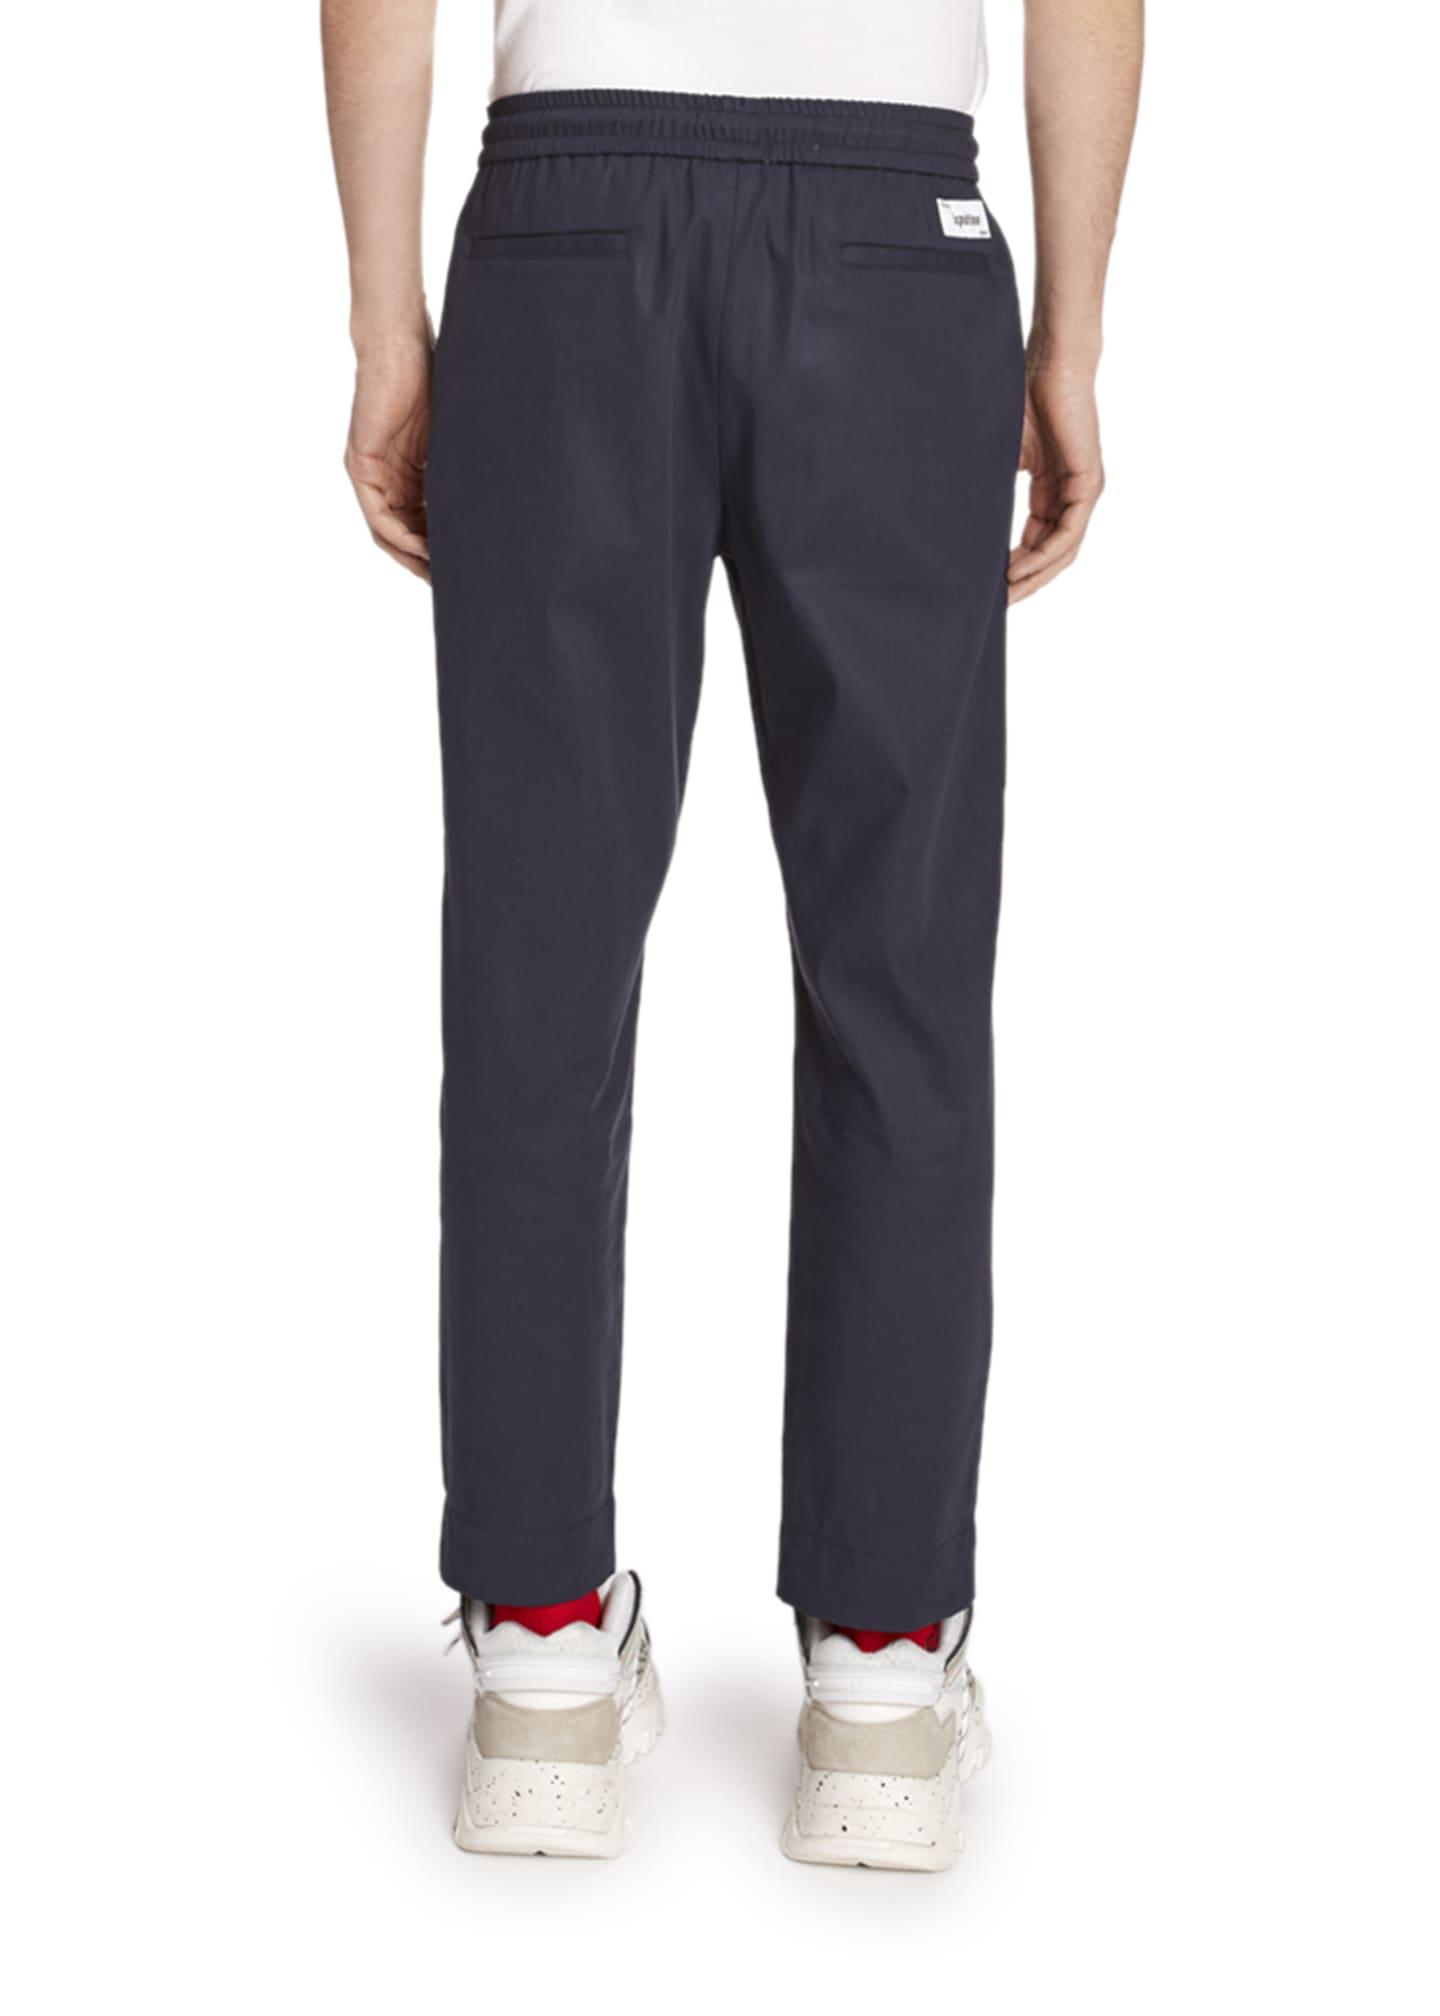 KENZO Cotton Tapered Crop Pants in Dark Blue (Blue) for Men - Lyst